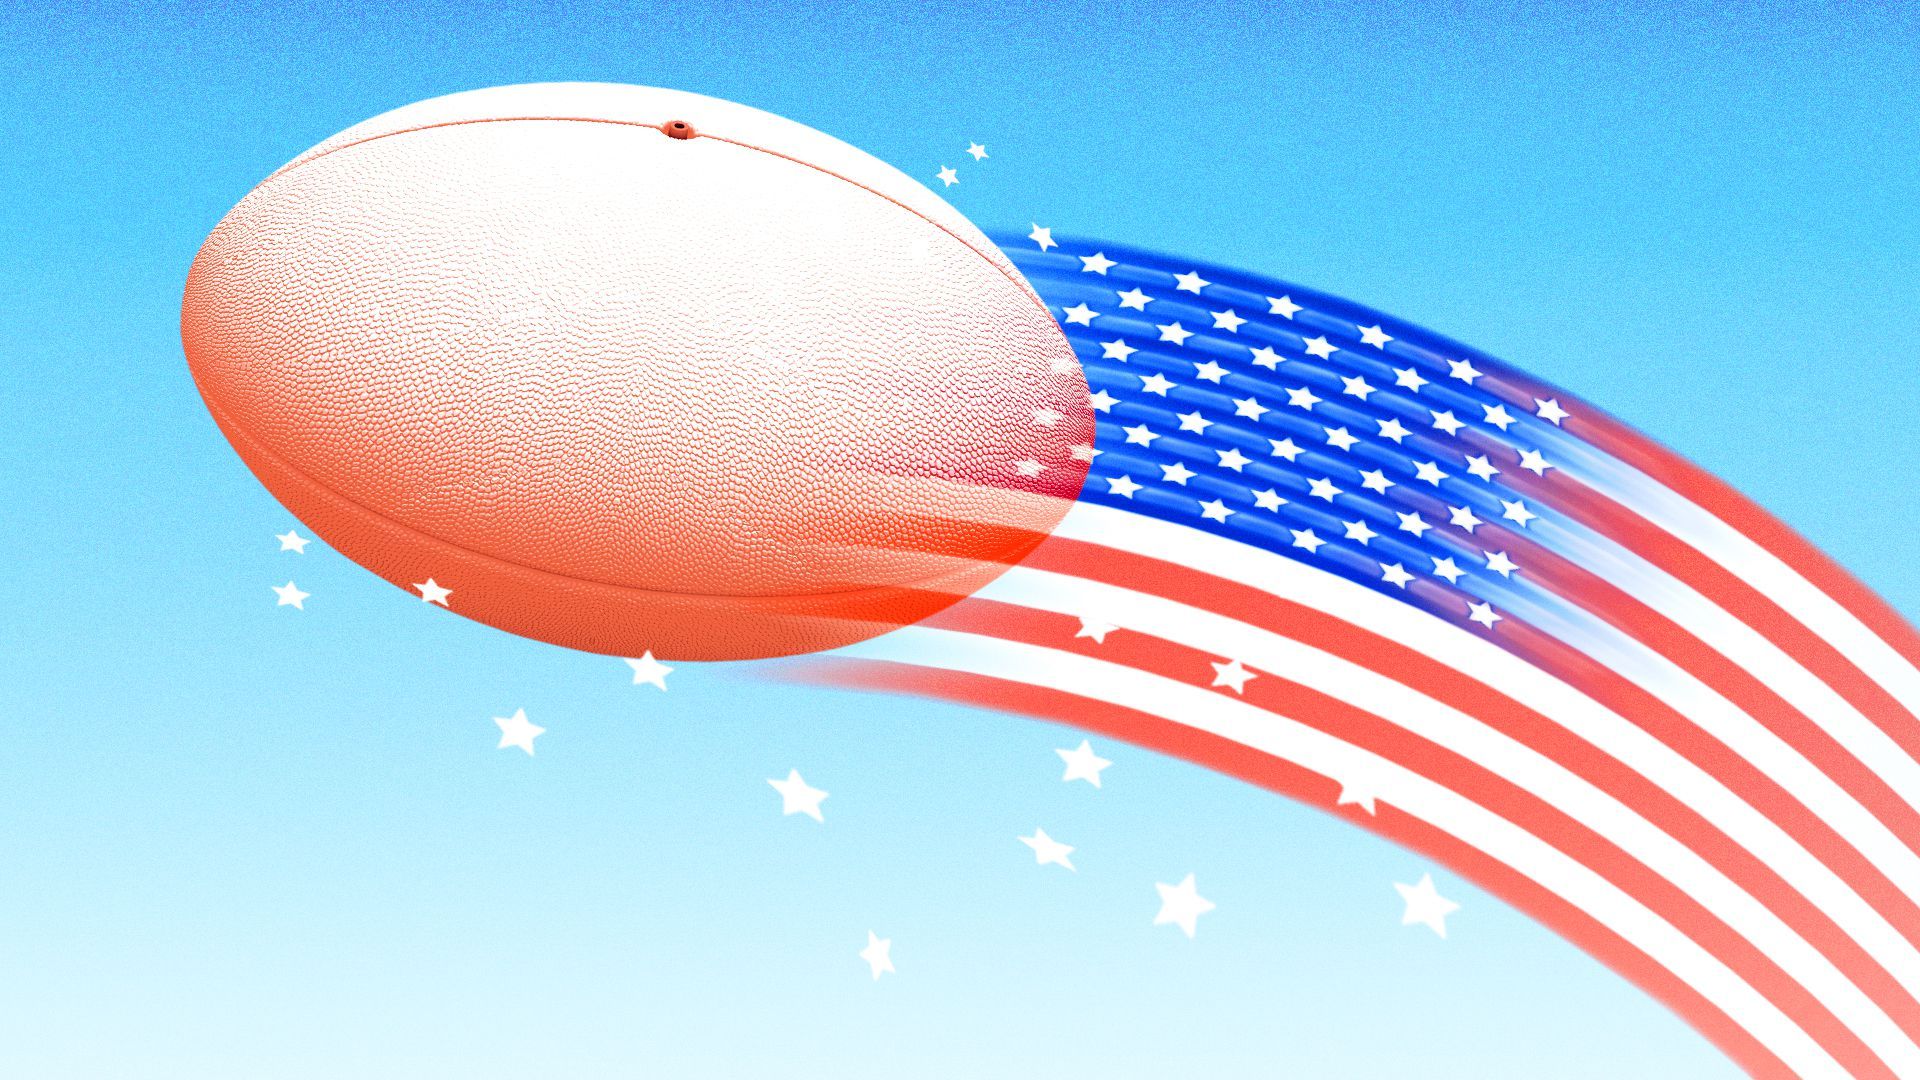 Illustration of a rugby ball mid-flight in the air with a U.S. flag trailing behind in place of motion lines